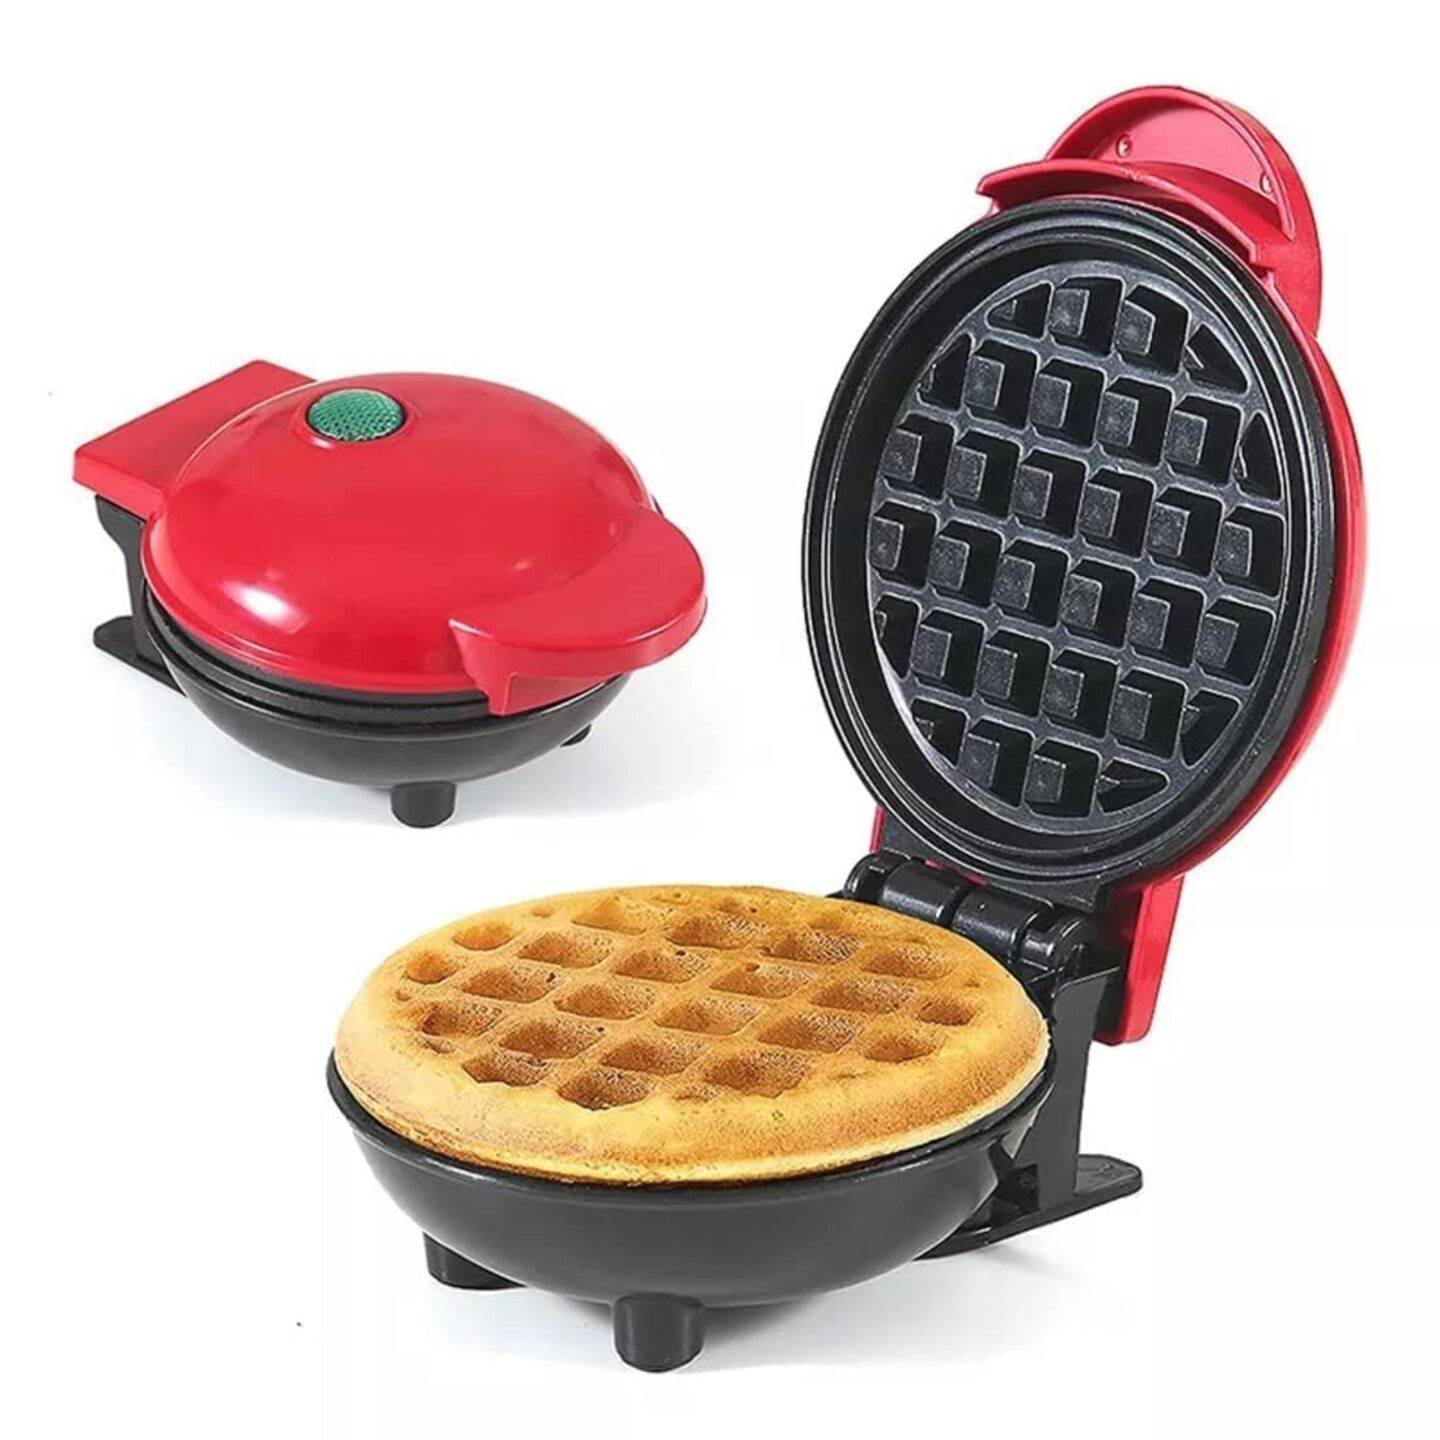 Non-Stick Waffle Maker Machine for making Waffles, Pizzas, Pan cakes, Falafals, Chaffals and more